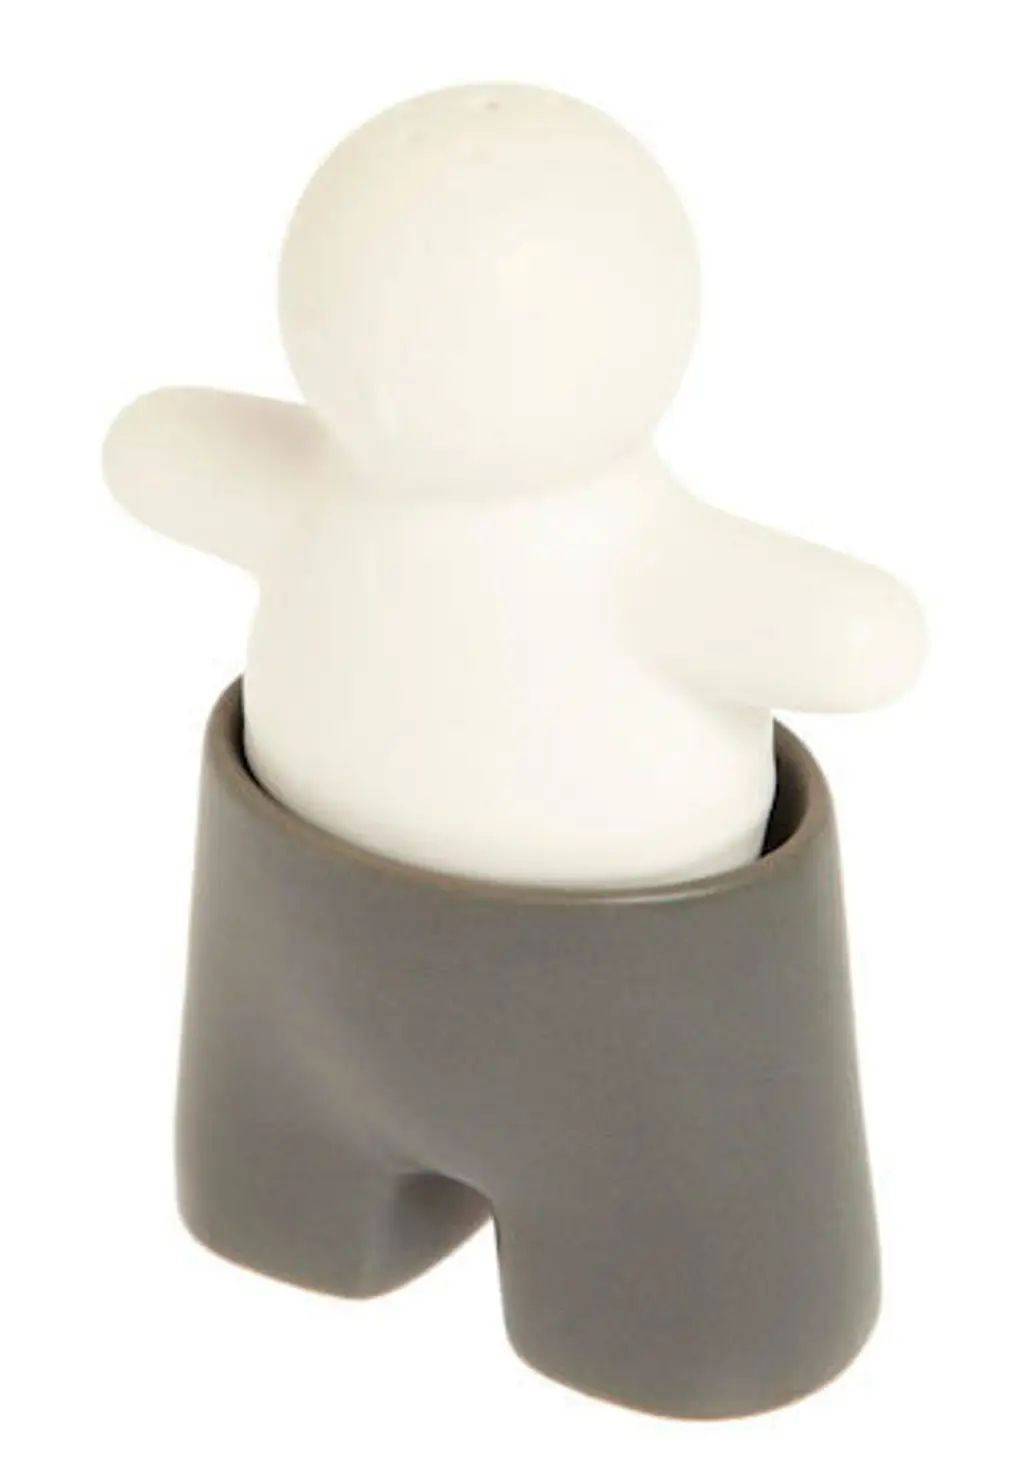 Who Wears the Pants? Salt and Pepper Shaker